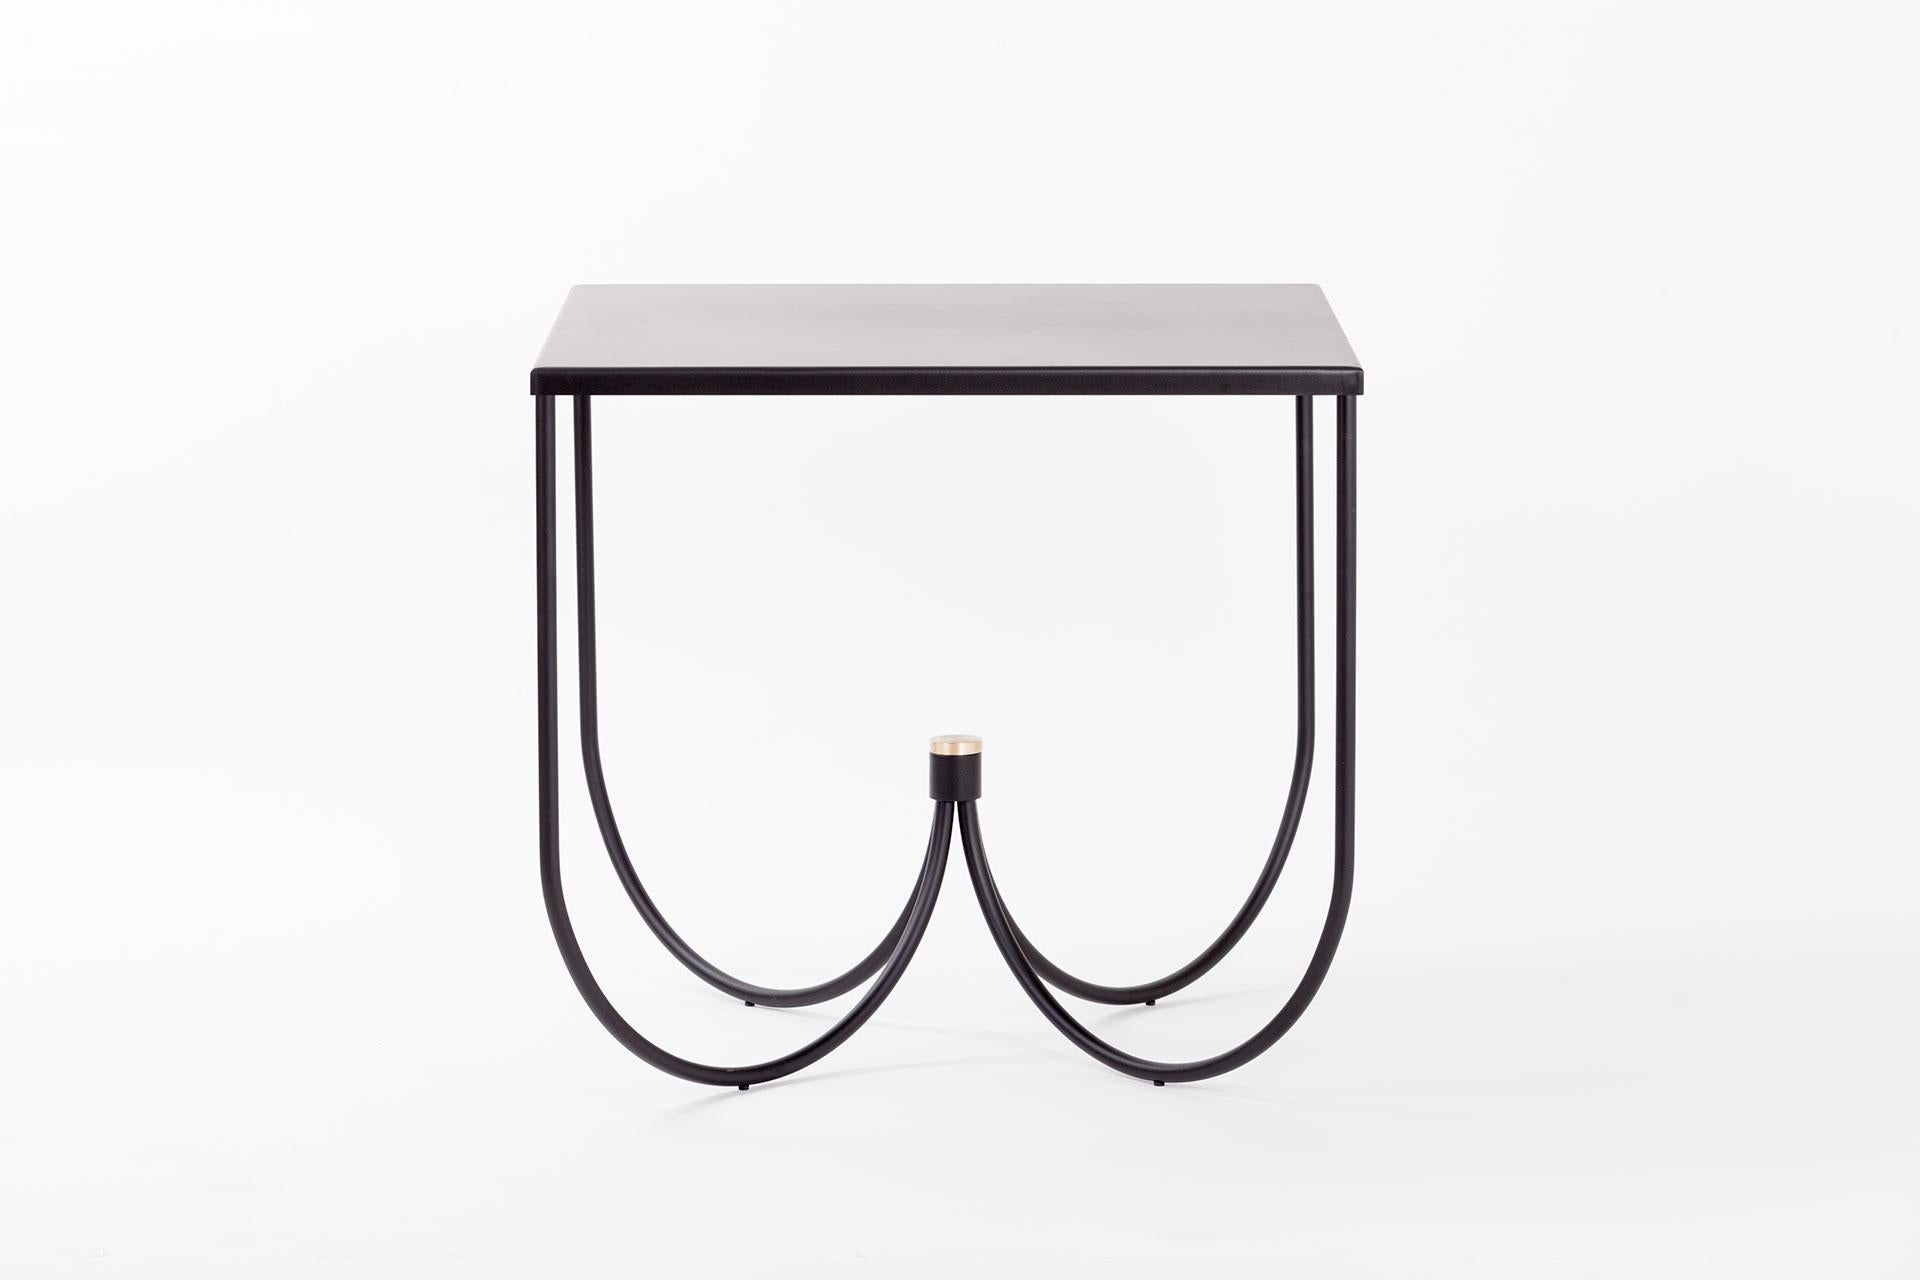 Centro table by Mingardo
Dimensions: D80 x W80 x H75 cm 
Materials: RAL 9005 black varnished iron structure and satin natural brass details
Weight: 26 kg

Also Available in different finishes. Available in four leg square top and three leg